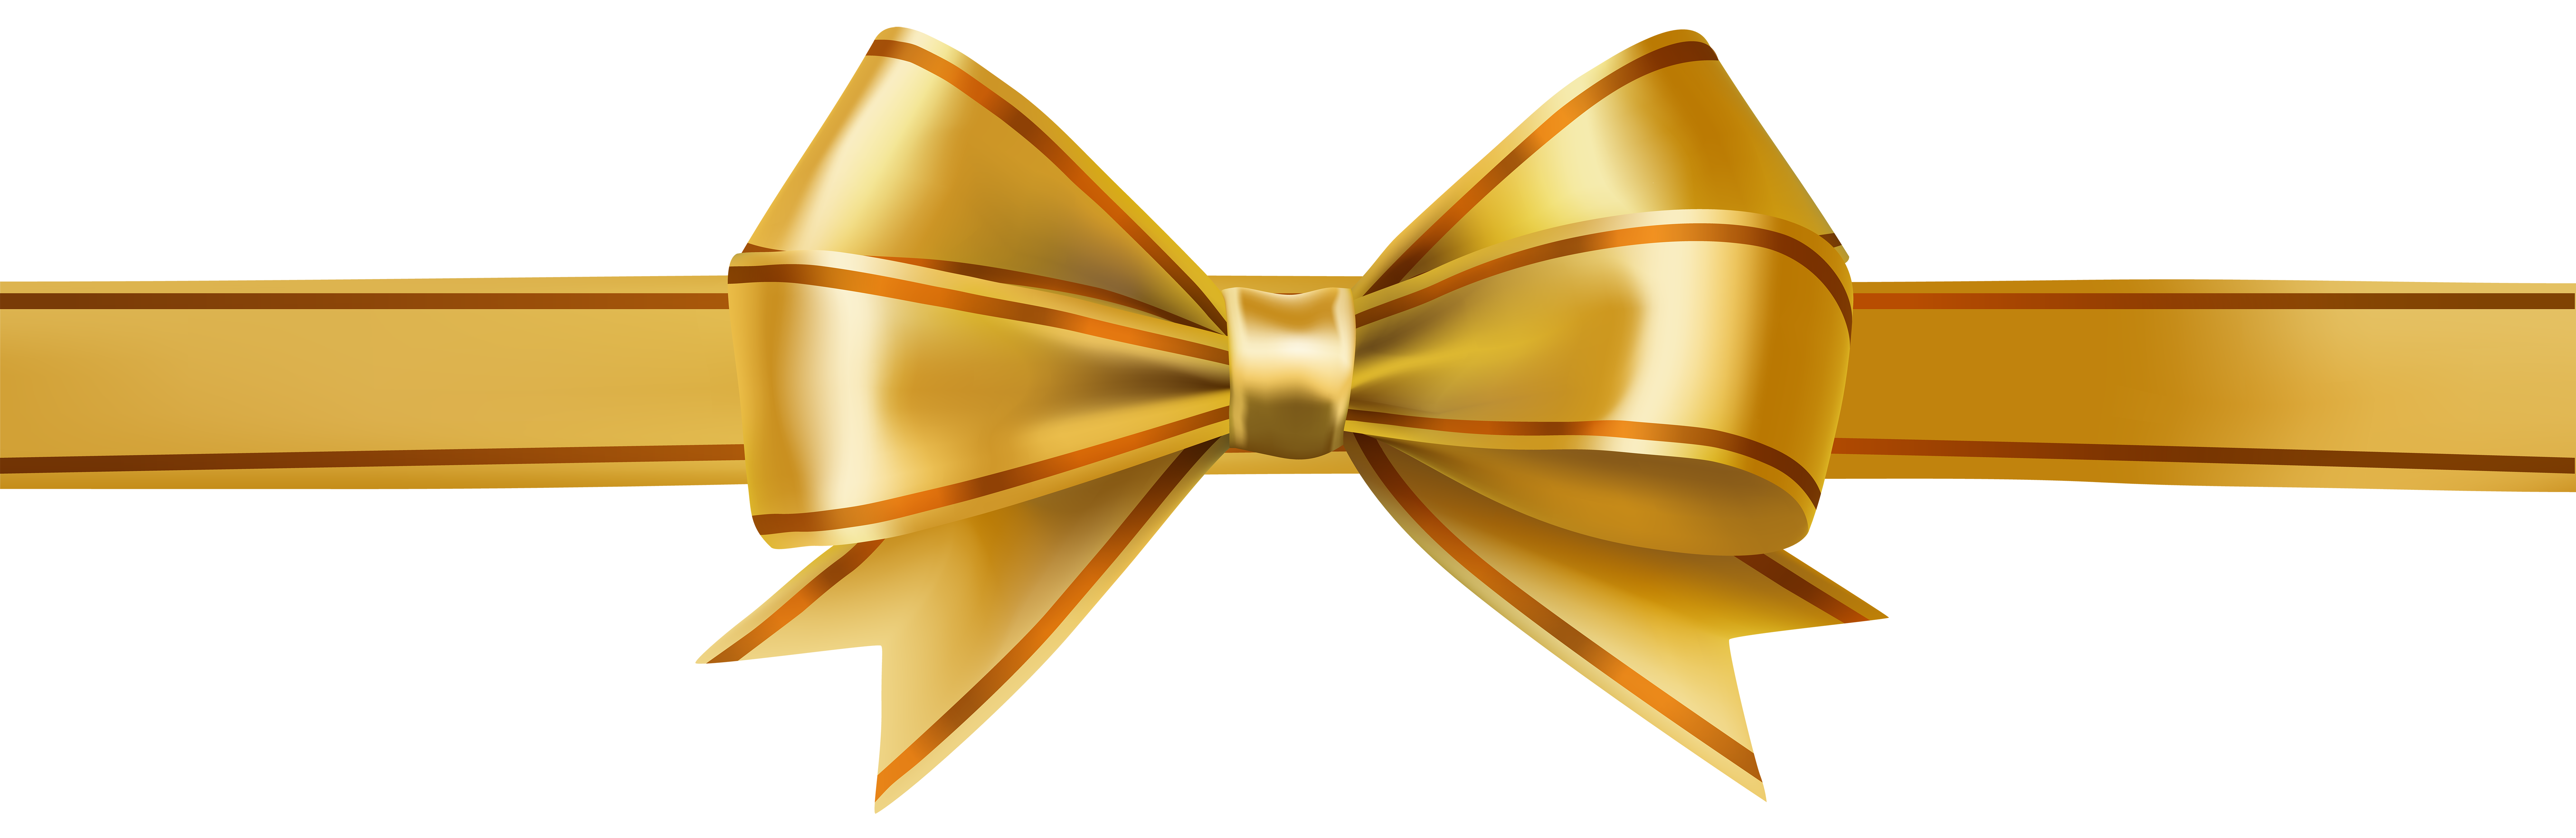 clipart gallery yellow ribbon